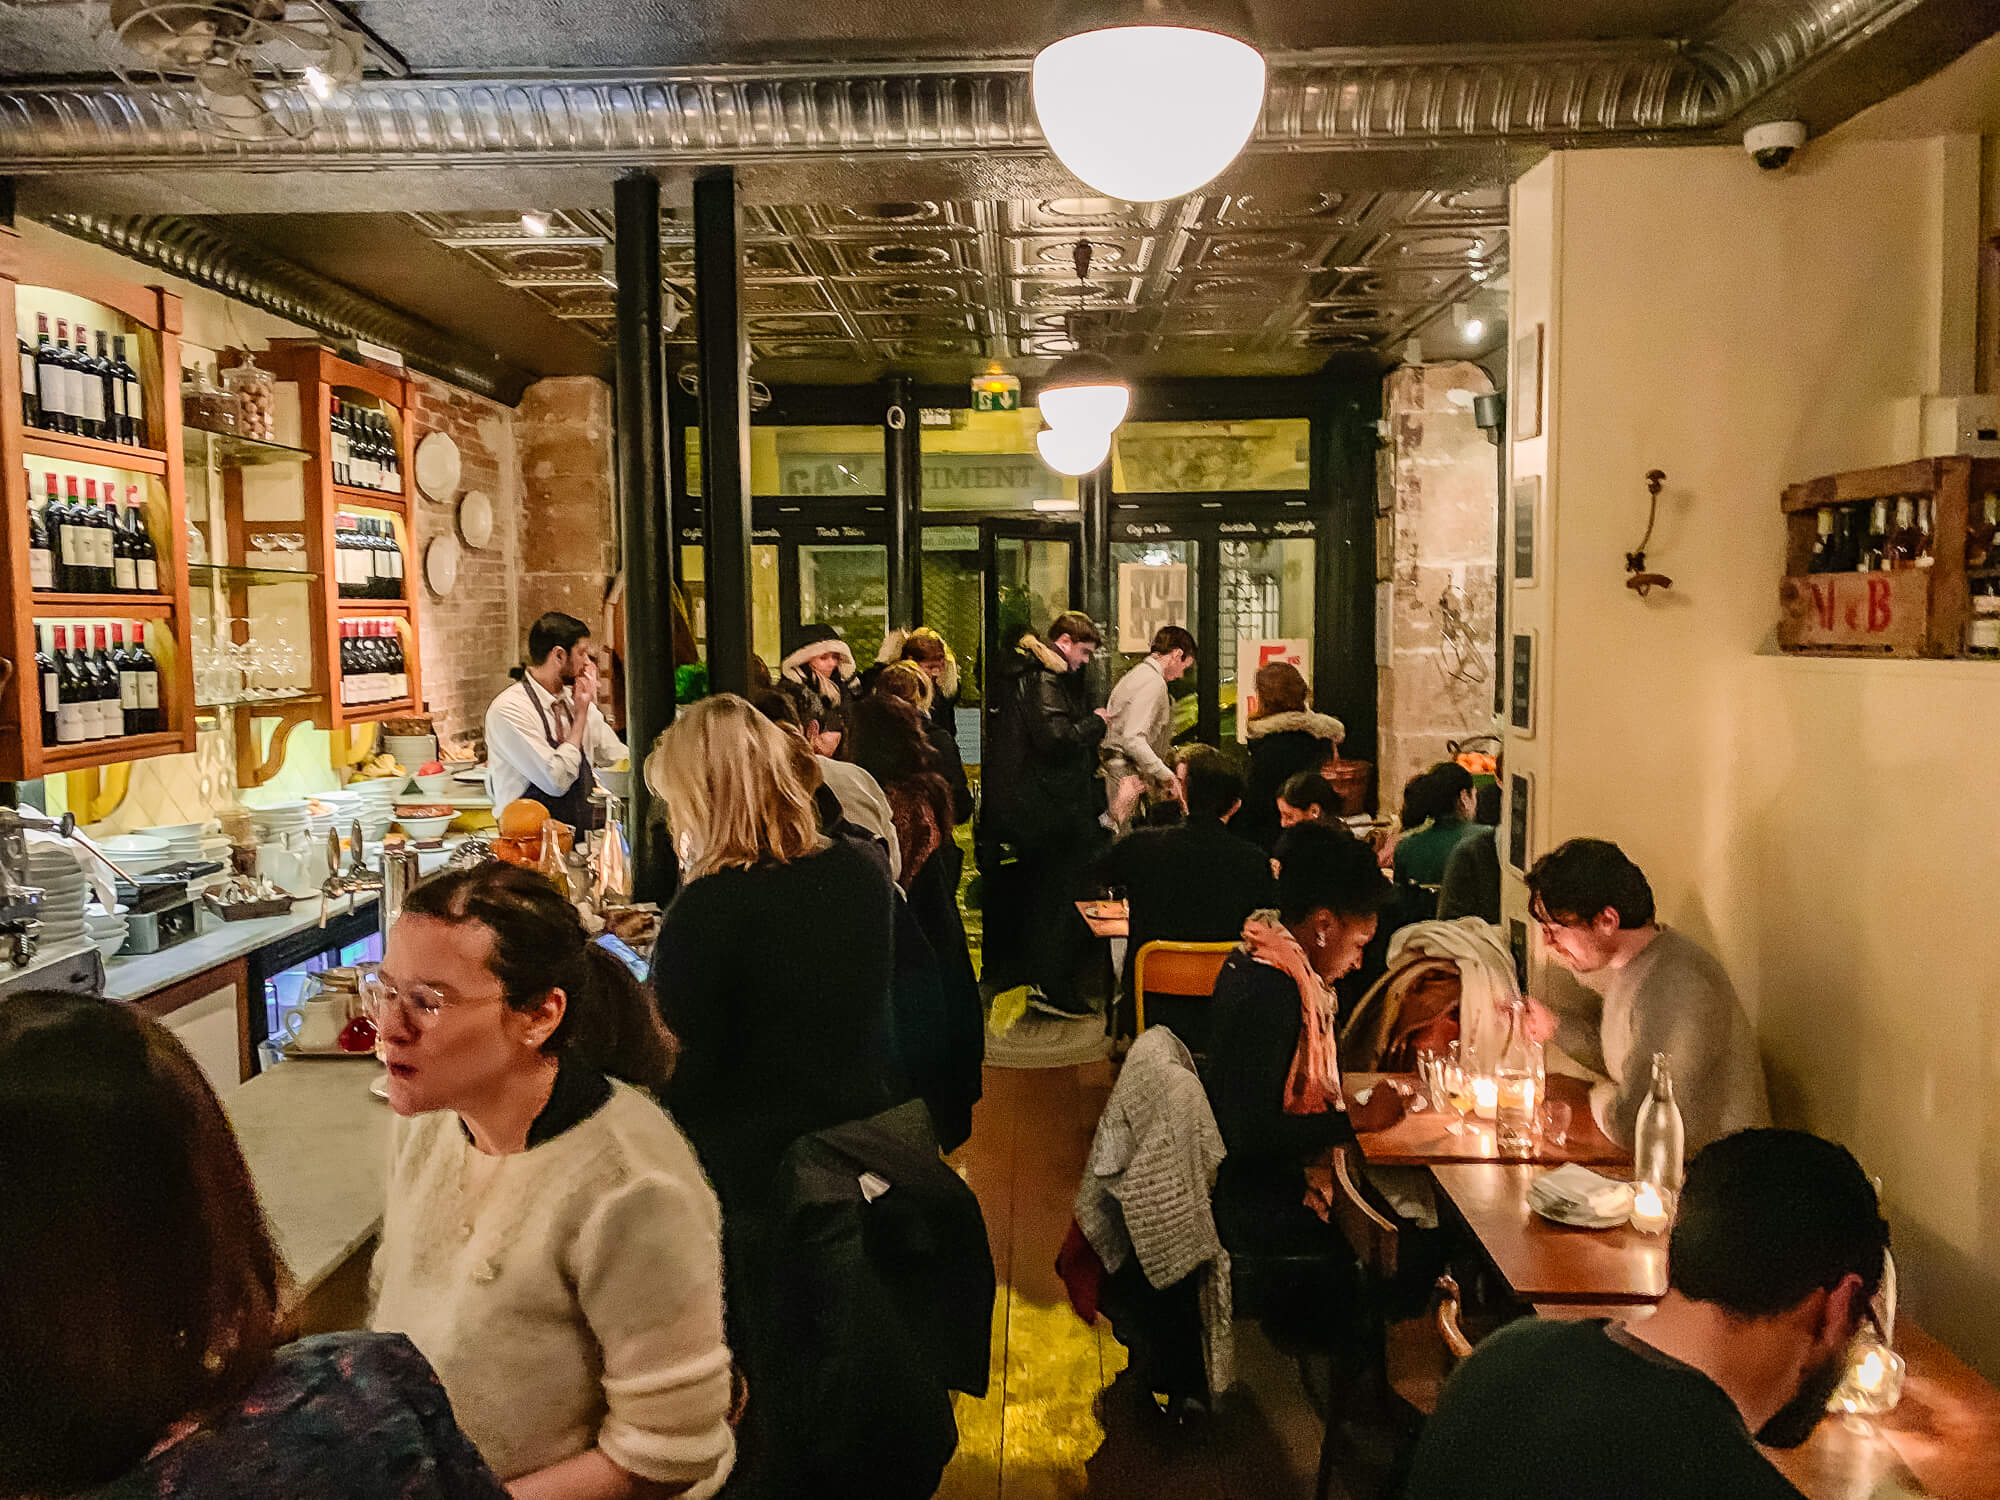 Buvette Paris on a busy night